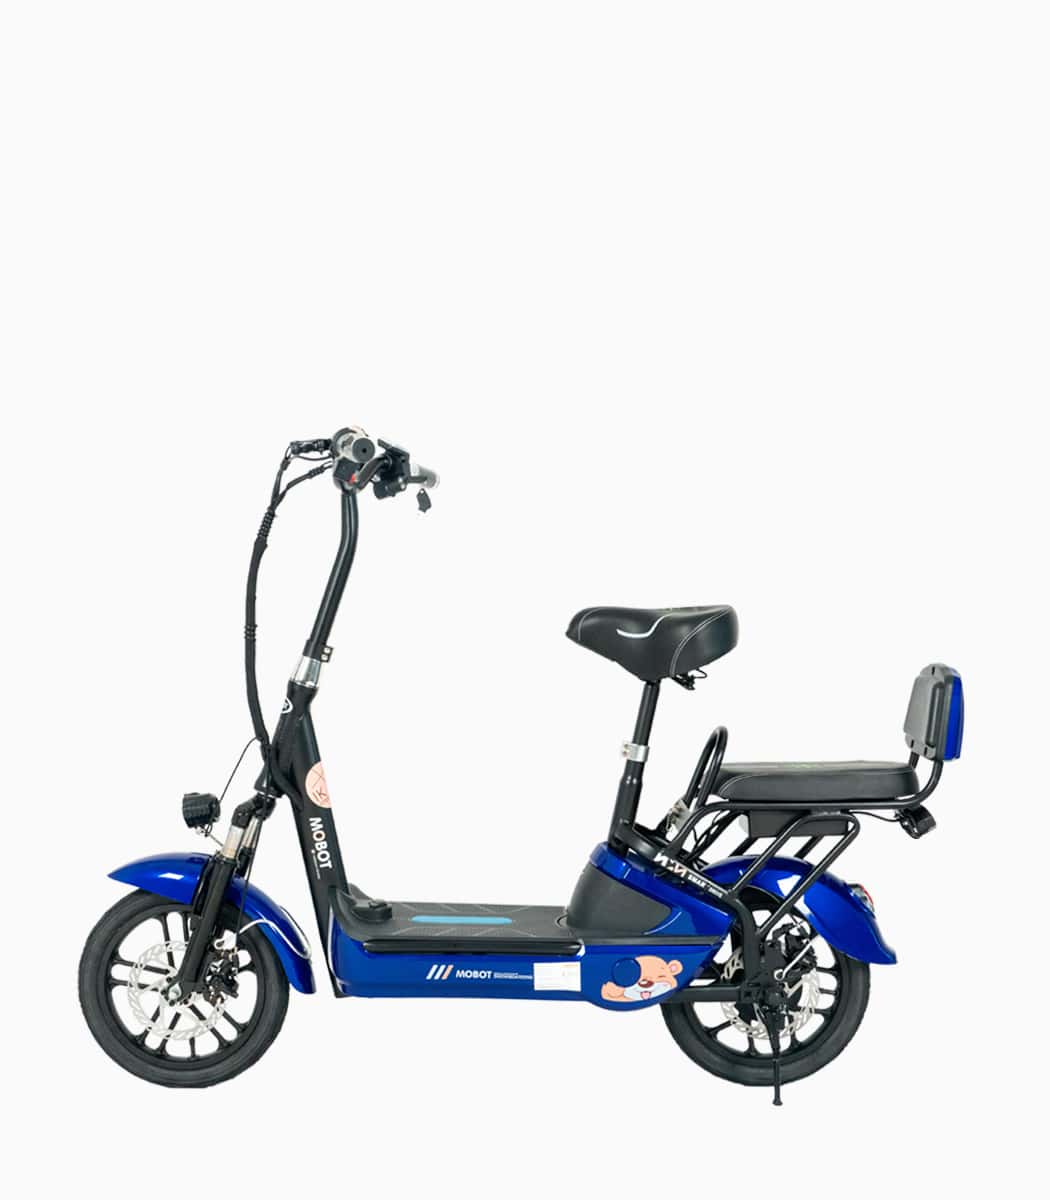 MOBOT EV (Blue10AH) UL2272 certified seated e-scooter left